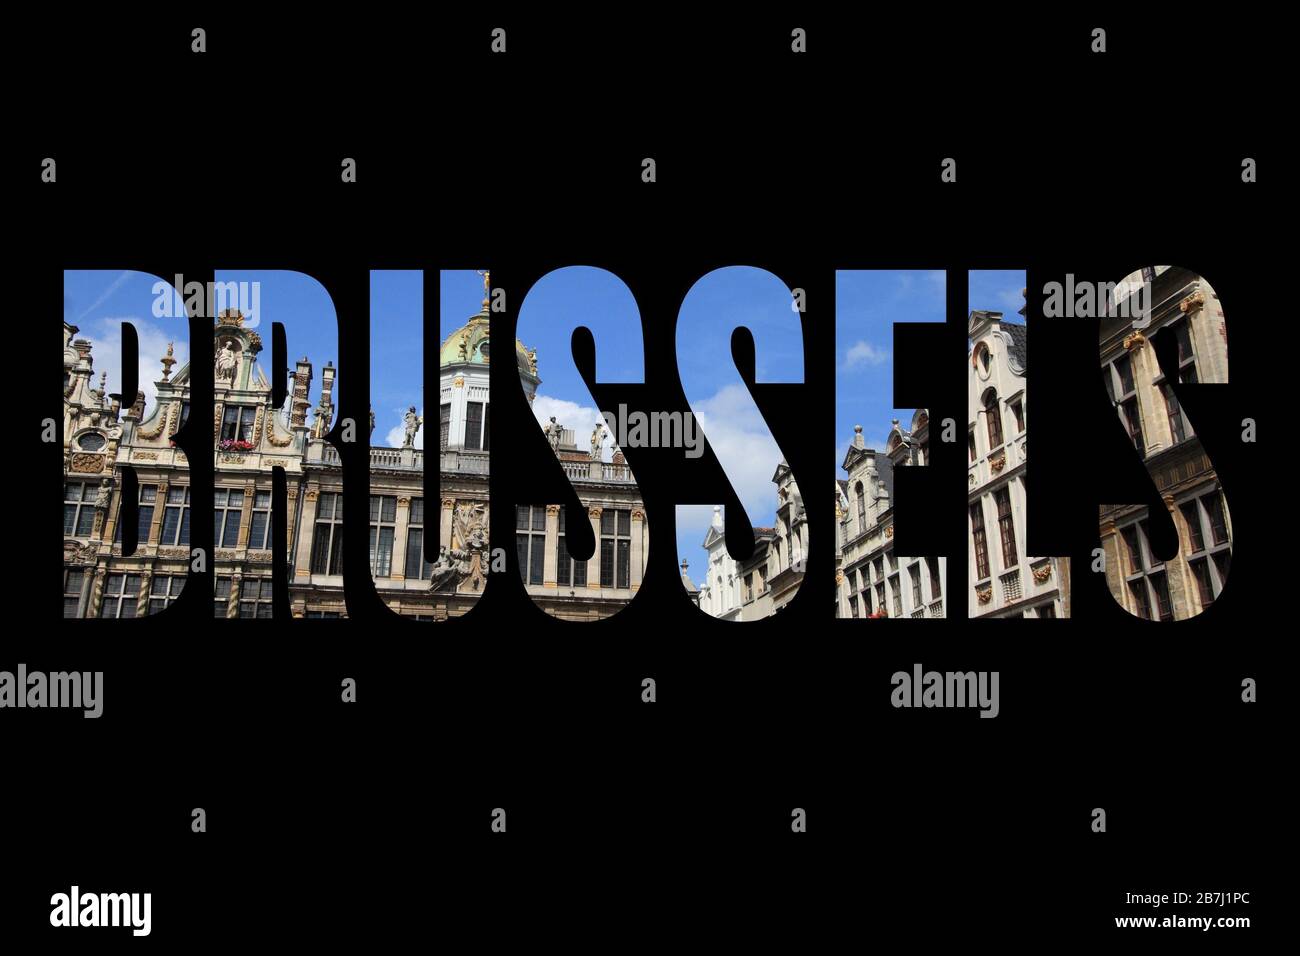 Brussels, Belgium - city name text with photo in background. Stock Photo